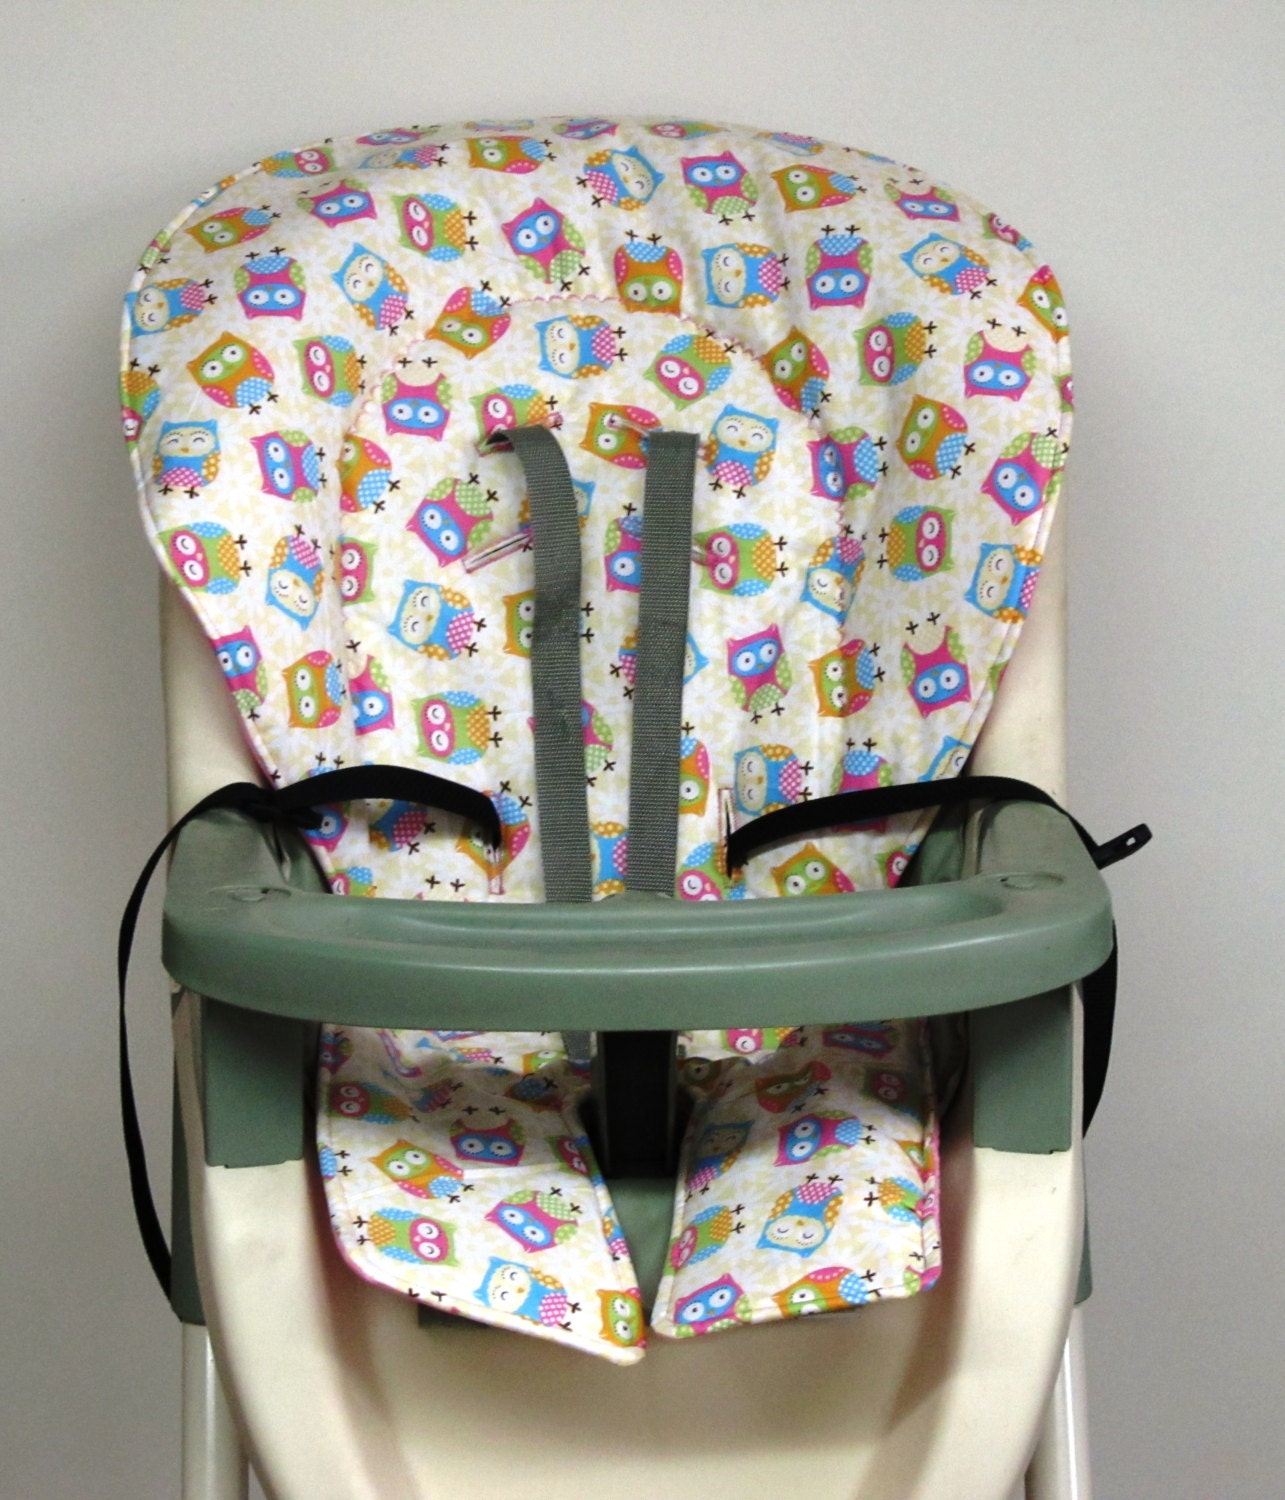 GRACO high chair cover pad replacement girly owls